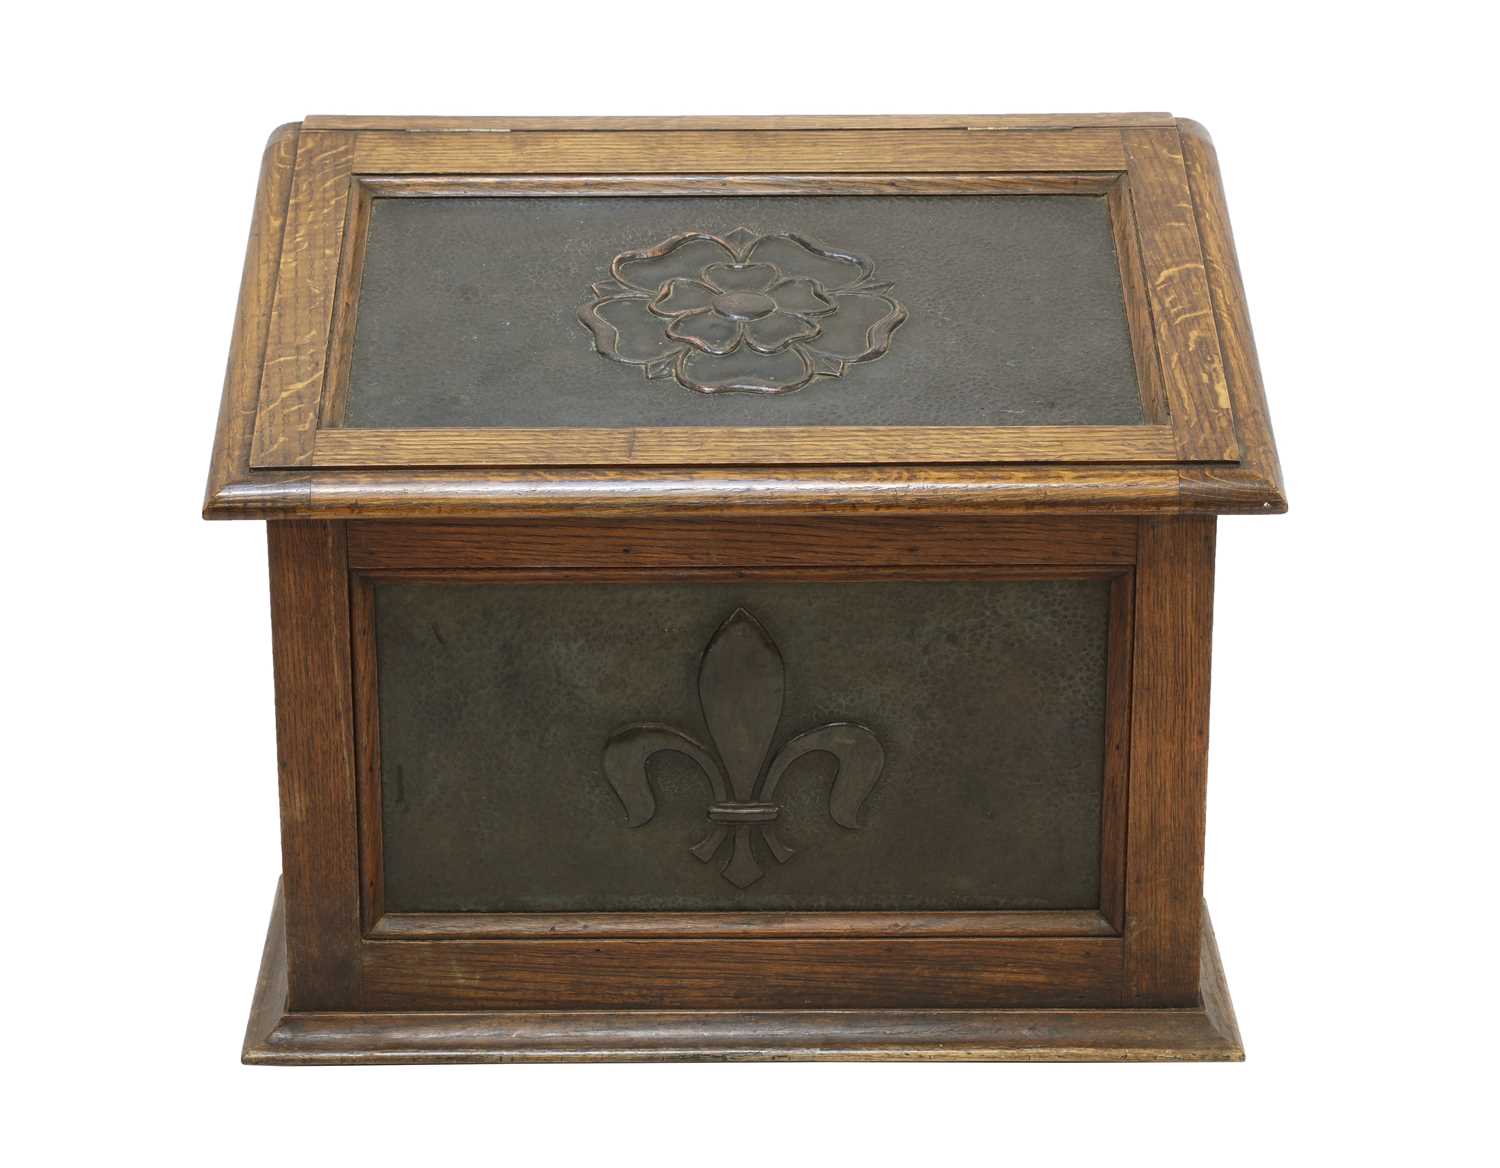 Lot 43 - An Arts and Crafts oak and copper-mounted log bin